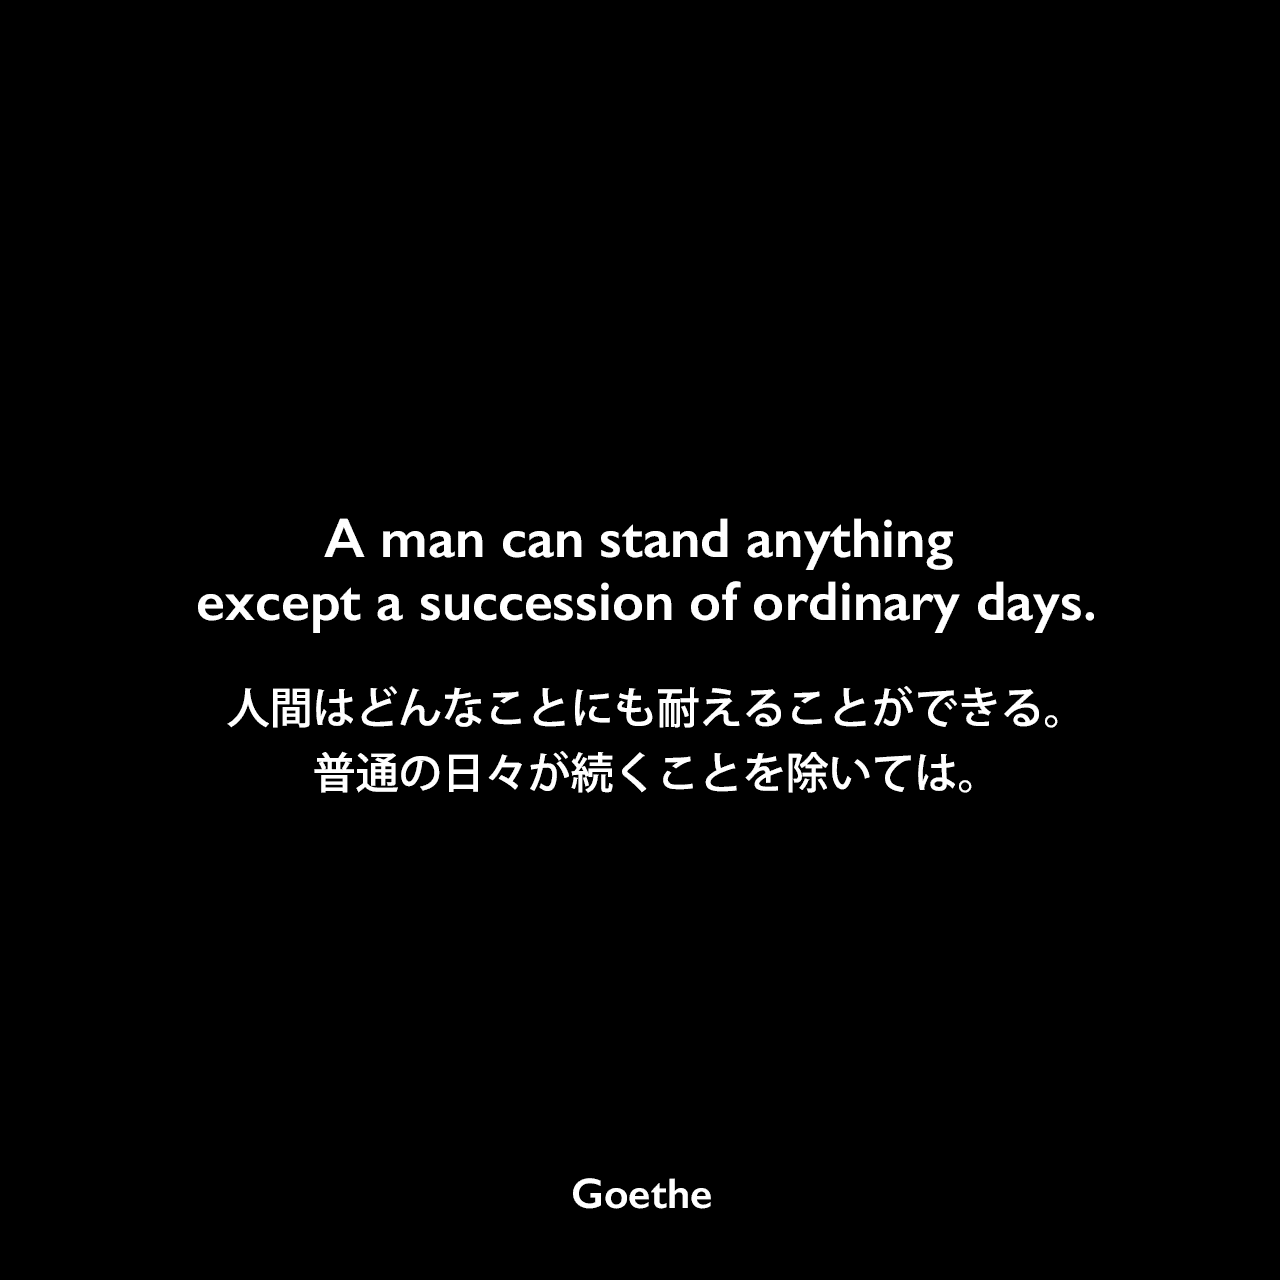 A man can stand anything except a succession of ordinary days.人間はどんなことにも耐えることができる。普通の日々が続くことを除いては。Johann Wolfgang von Goethe